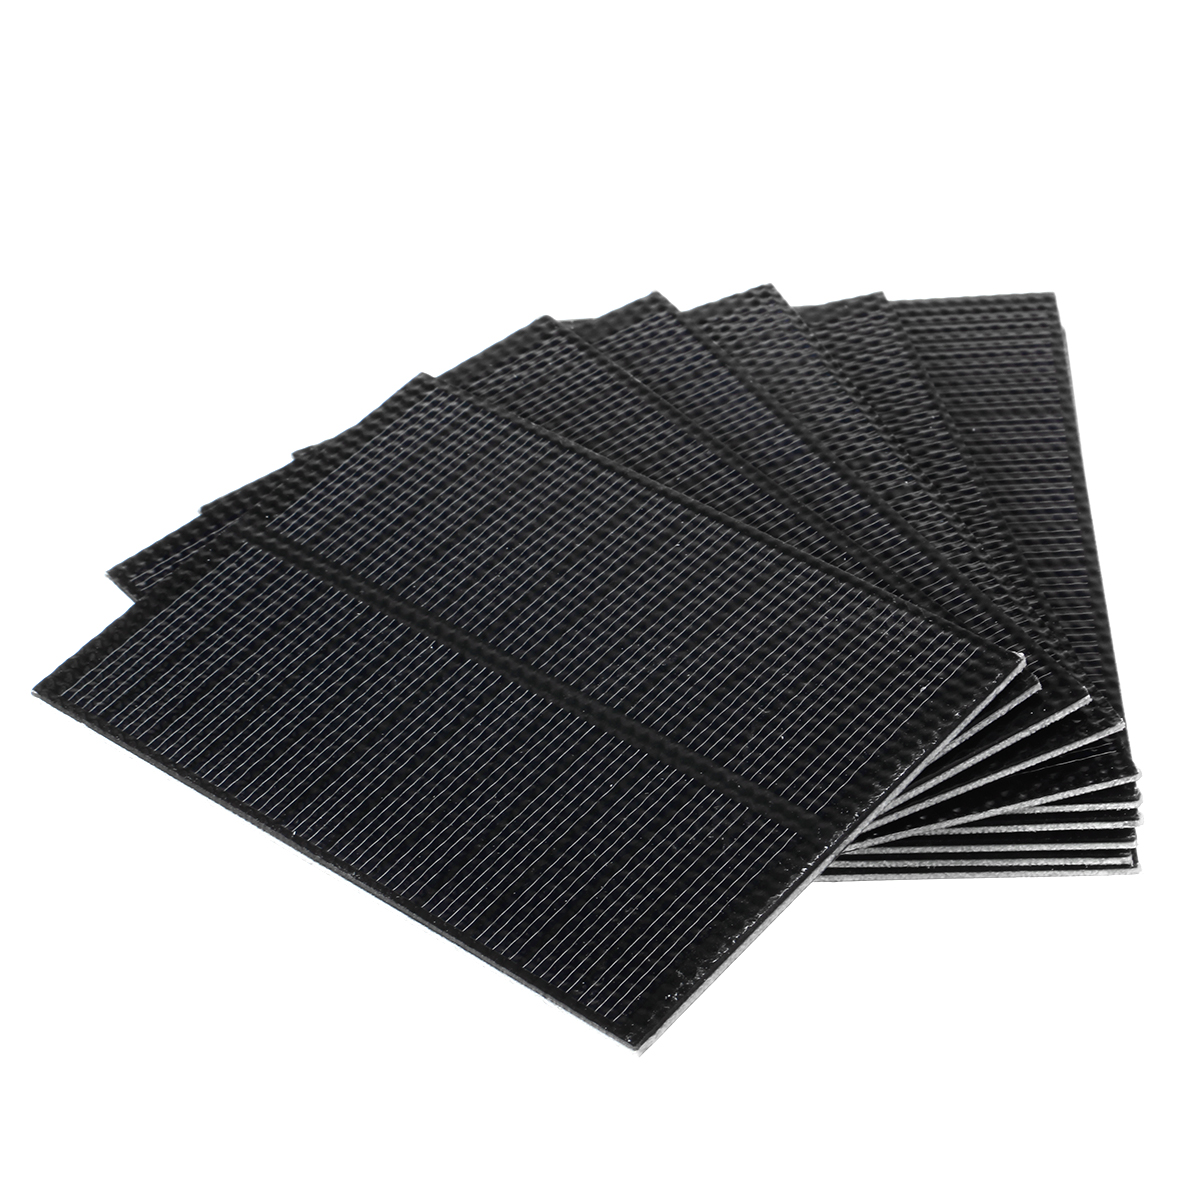 10-PCS-110times-80mm-ETFE-Mini-Solar-Cell-With-Bottom-Plate-Mono-Solar-Panel-Solar-Battery-Charger-S-1935844-8